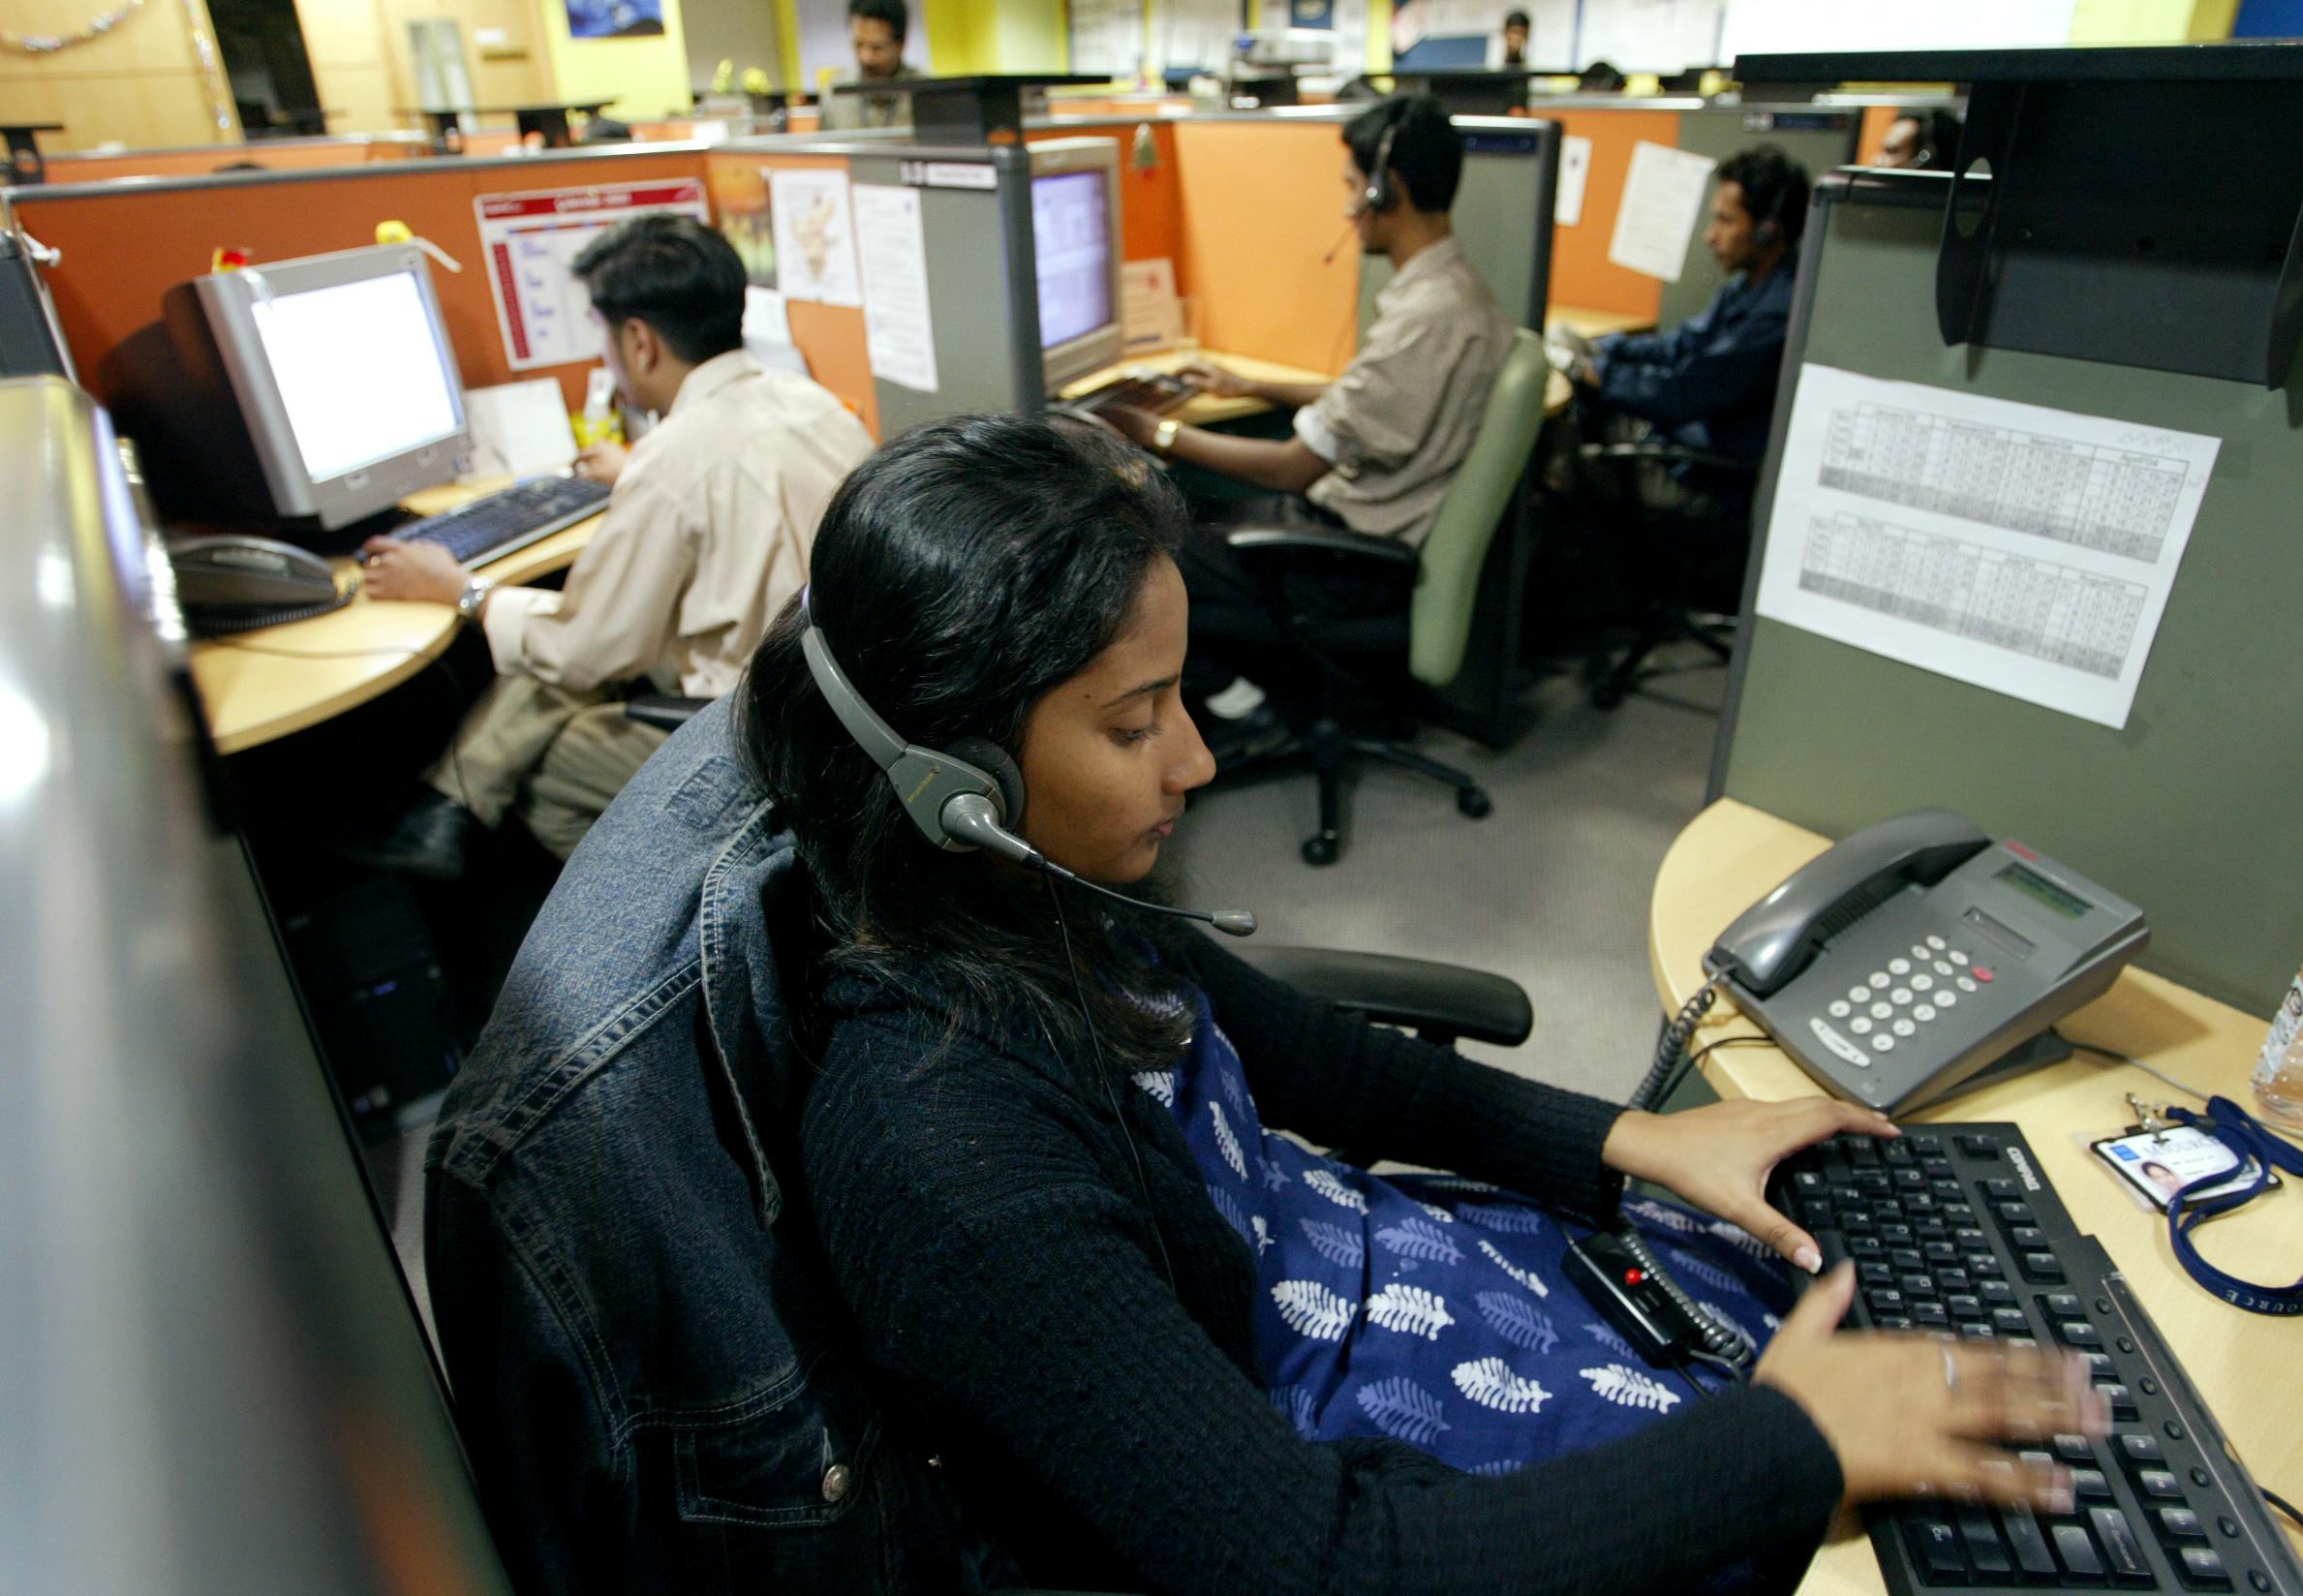 Four out of five employees in India looking to switch jobs within a year